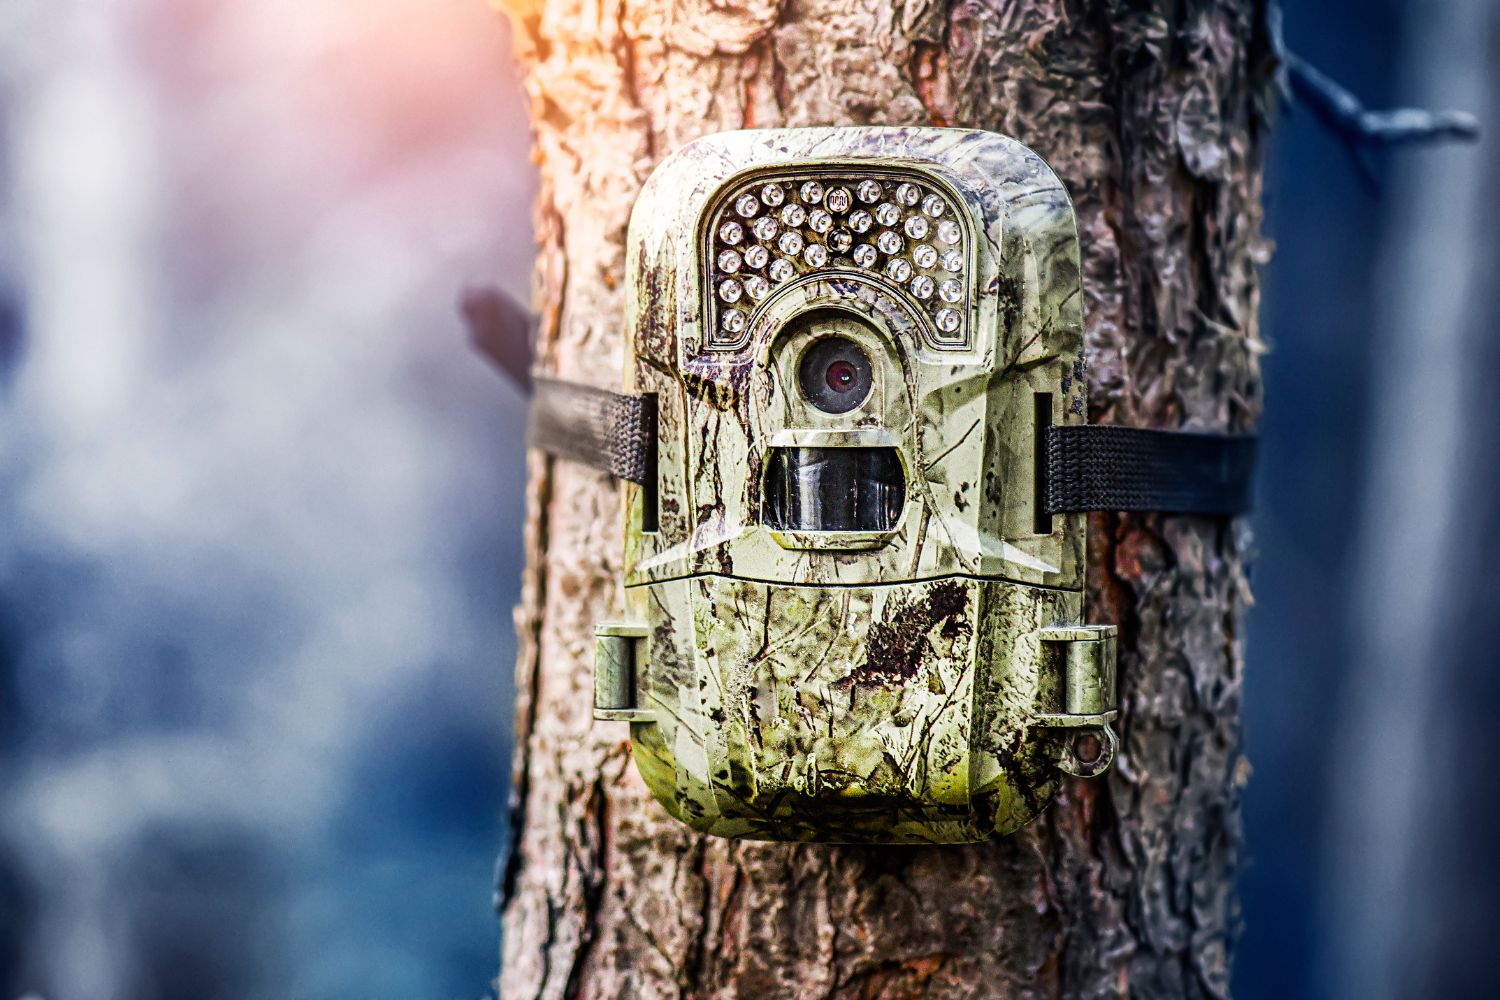 trail camera is tied to the tree Photo by Krasula on shutterstock